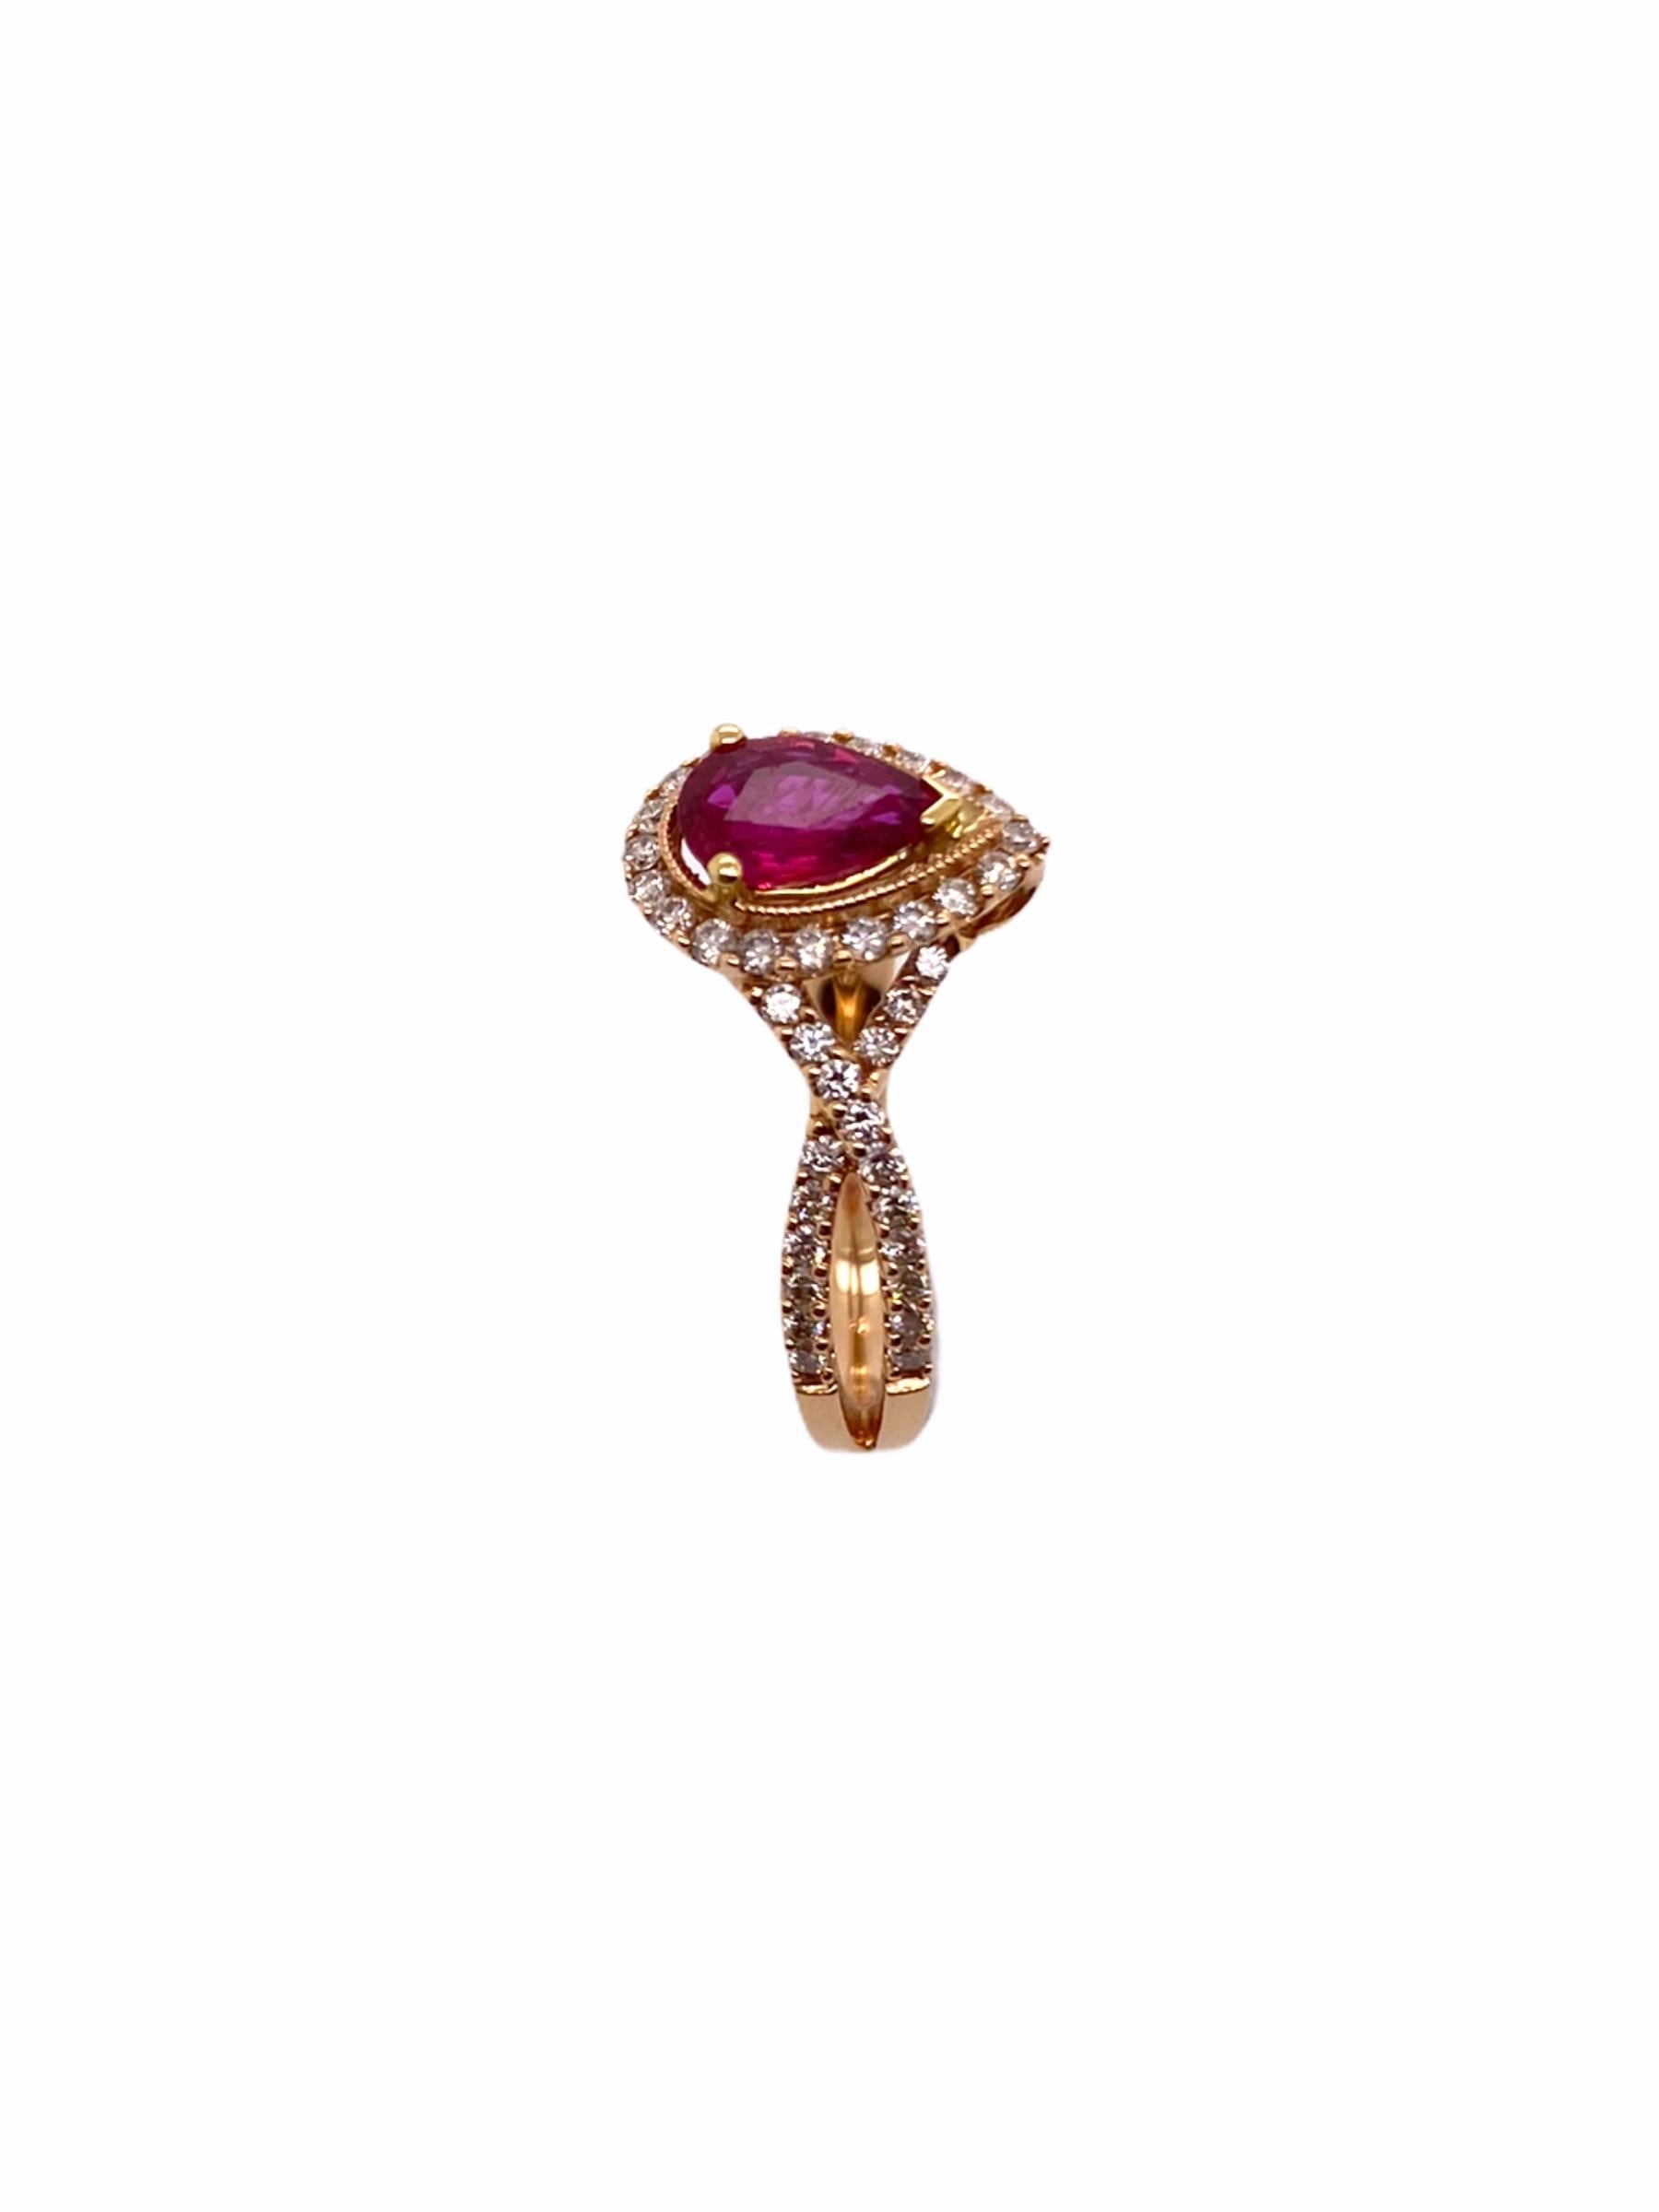 In this article, PARIS Craft House offers a 0.75ct blazing Pear-cut Ruby and 0.47ct Round Diamonds crafted in 18 Karat Rose Gold. Garnered inspiration from the Persian Empire, this piece showcases a refined and detailed craftsmanship of many years